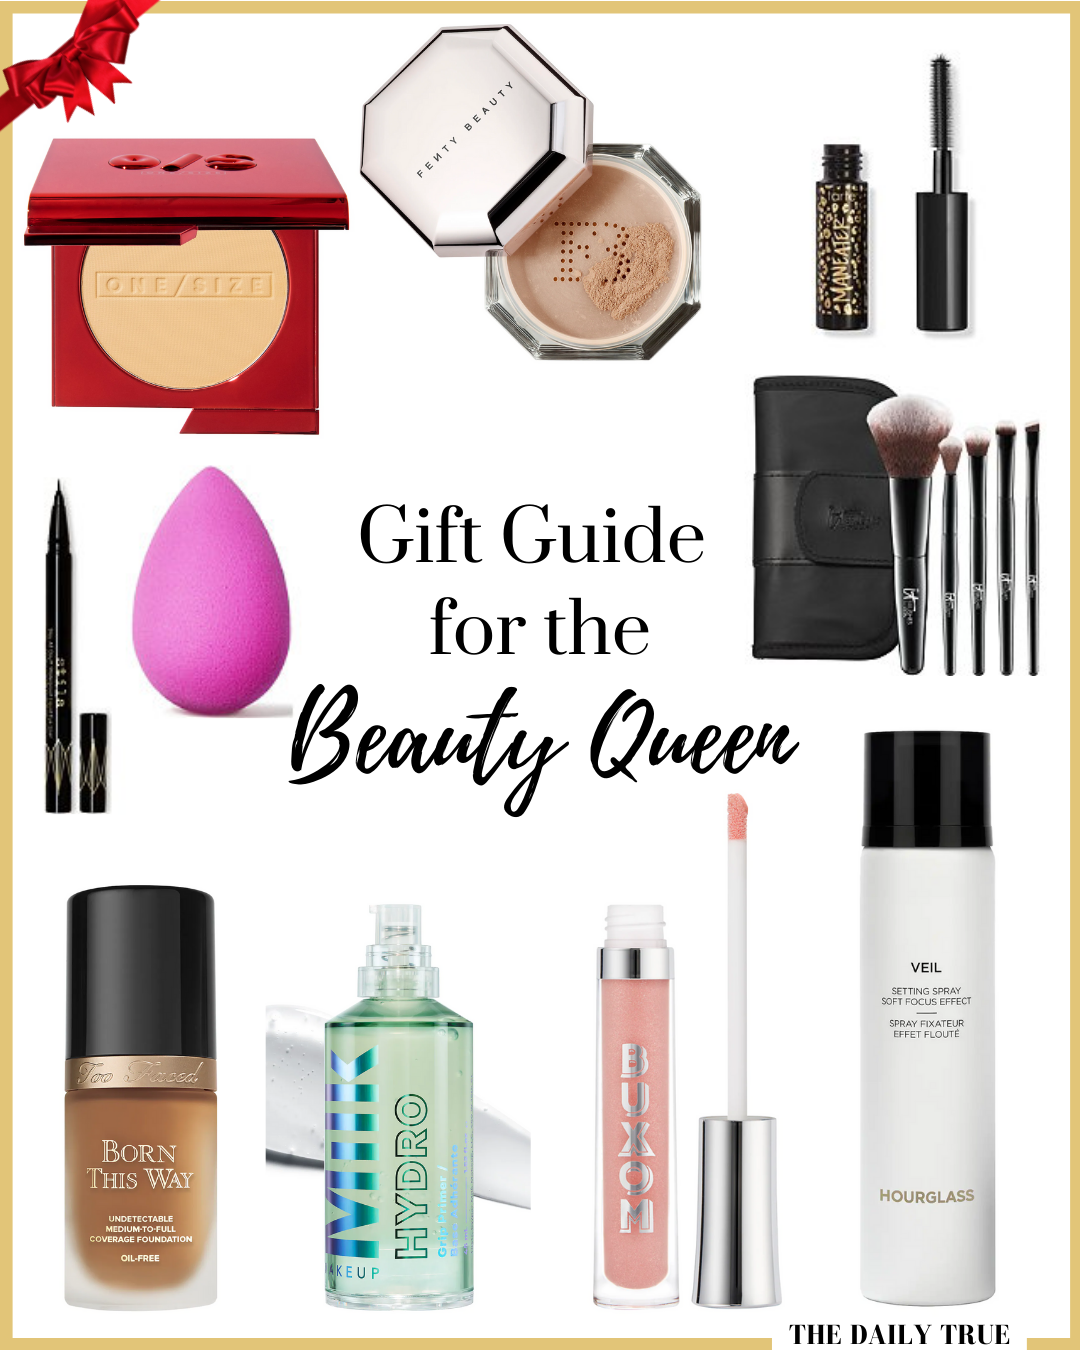 Gift ideas for a beauty queen or makeup lover